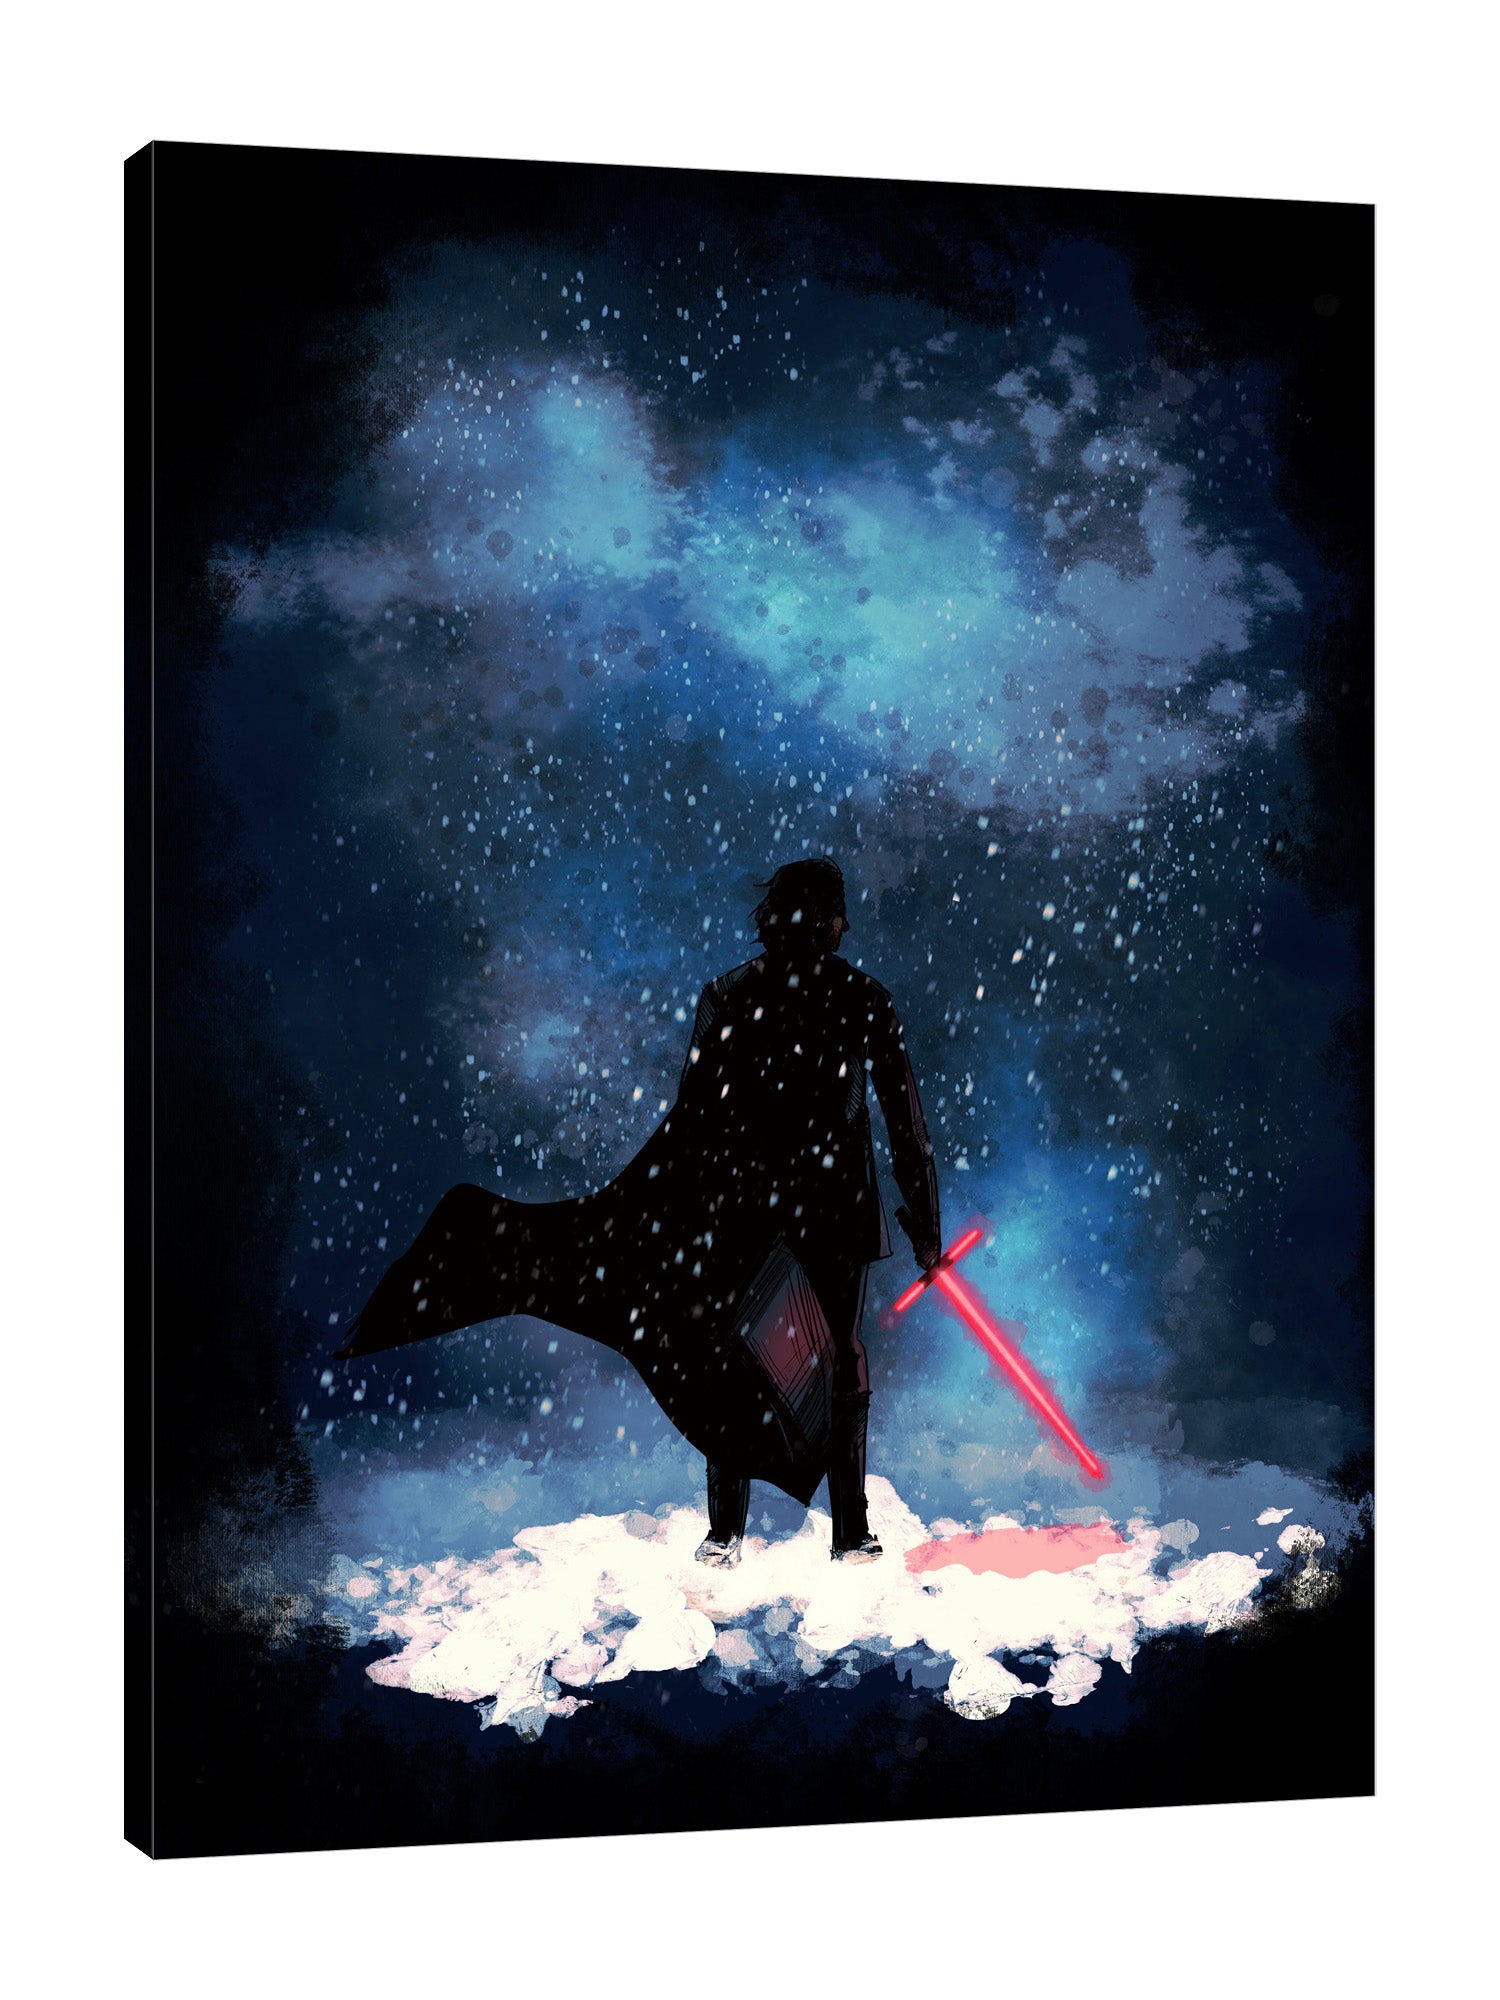 Ludwig-Van-Bacon,Vertical,3X4,Modern & Contemporary,Entertainment,Fantasy & Sci-Fi,People,people,person,man,ben,figure,entertainment,sci fi,light saber,light sabers,galaxy,galaxies,stars,star,silhoutte,silhouttes,men,sword,swords,white,Red,Slate Gray,Blue,Charcoal Gray,Gray,Black